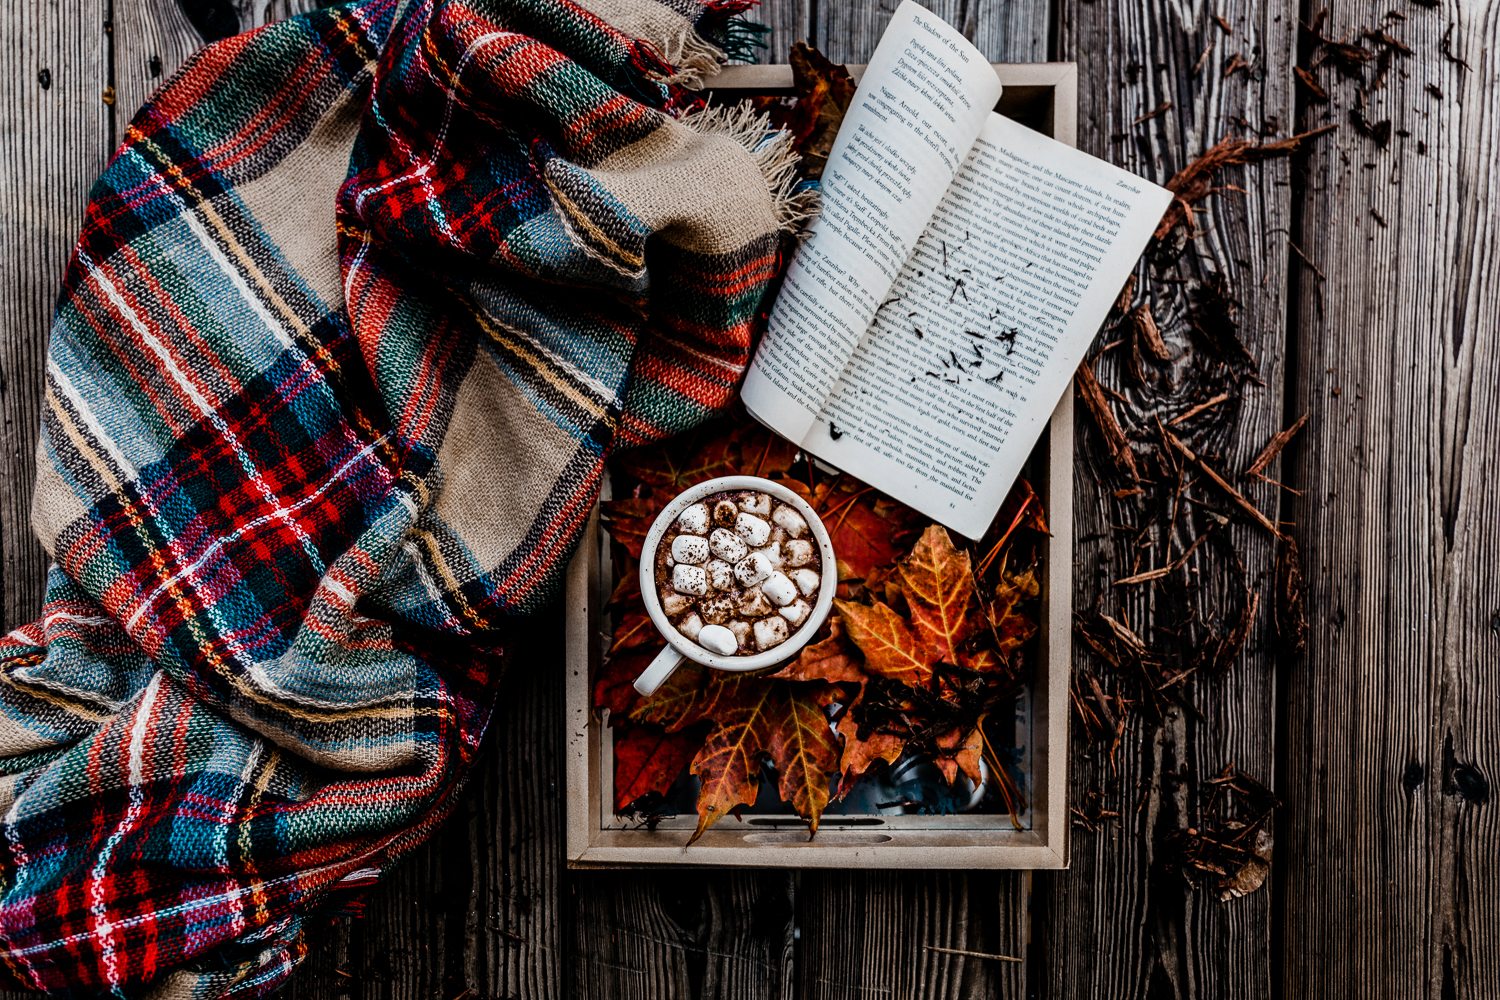 Blanket, tray, hot chocolate, and an open book